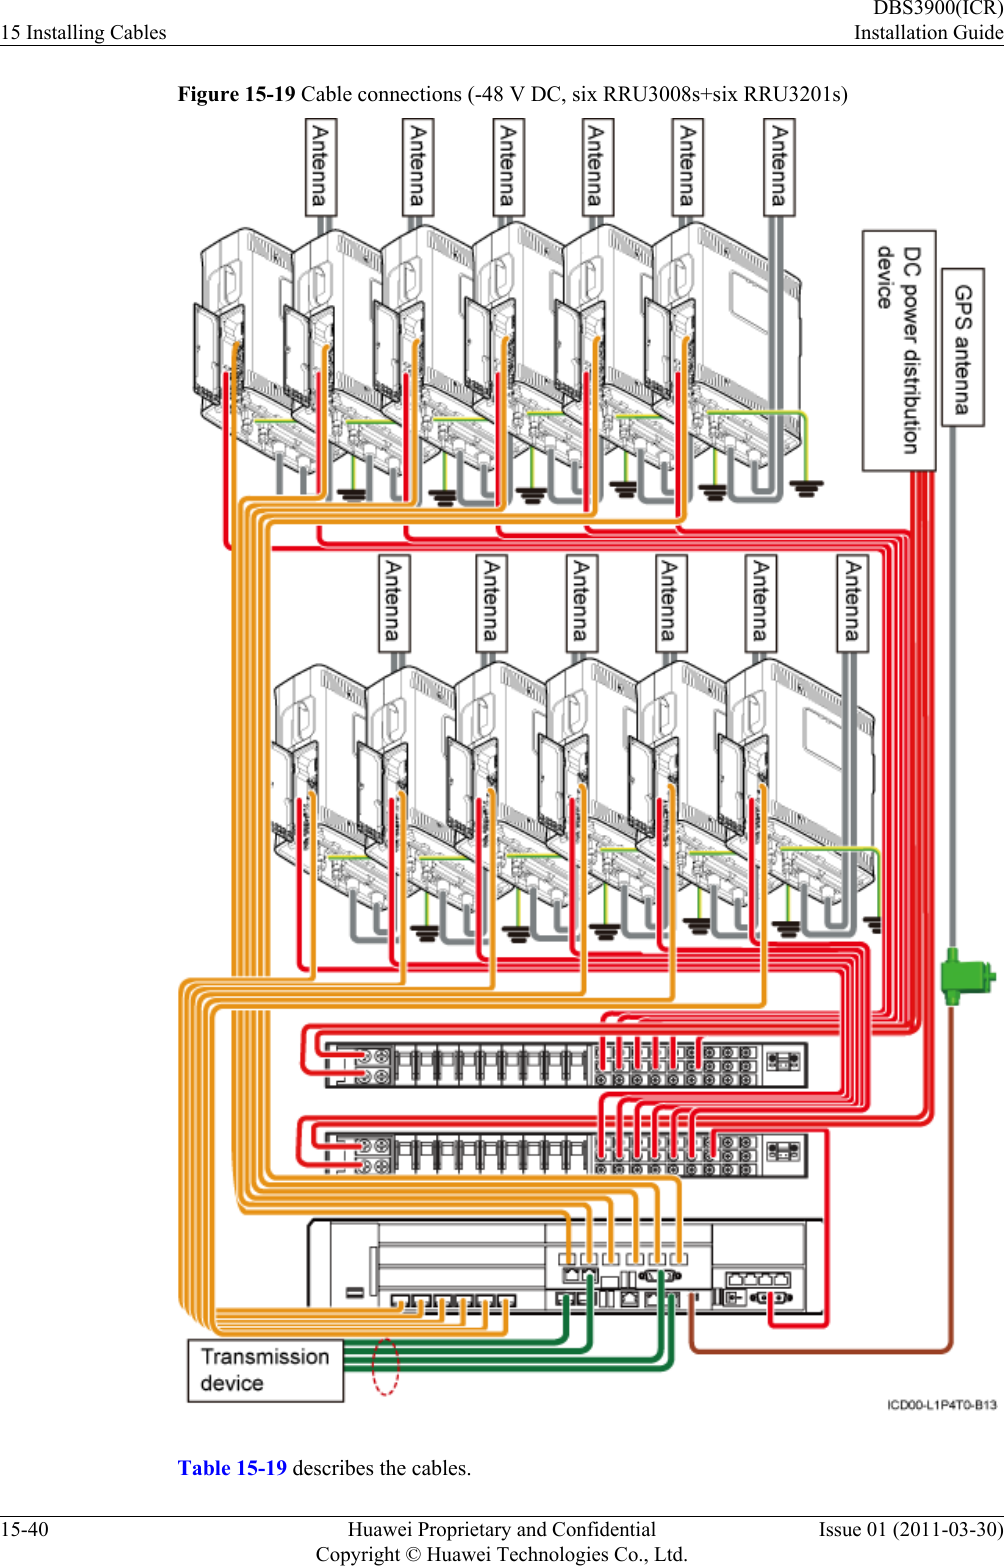 Figure 15-19 Cable connections (-48 V DC, six RRU3008s+six RRU3201s)Table 15-19 describes the cables.15 Installing CablesDBS3900(ICR)Installation Guide15-40 Huawei Proprietary and ConfidentialCopyright © Huawei Technologies Co., Ltd.Issue 01 (2011-03-30)